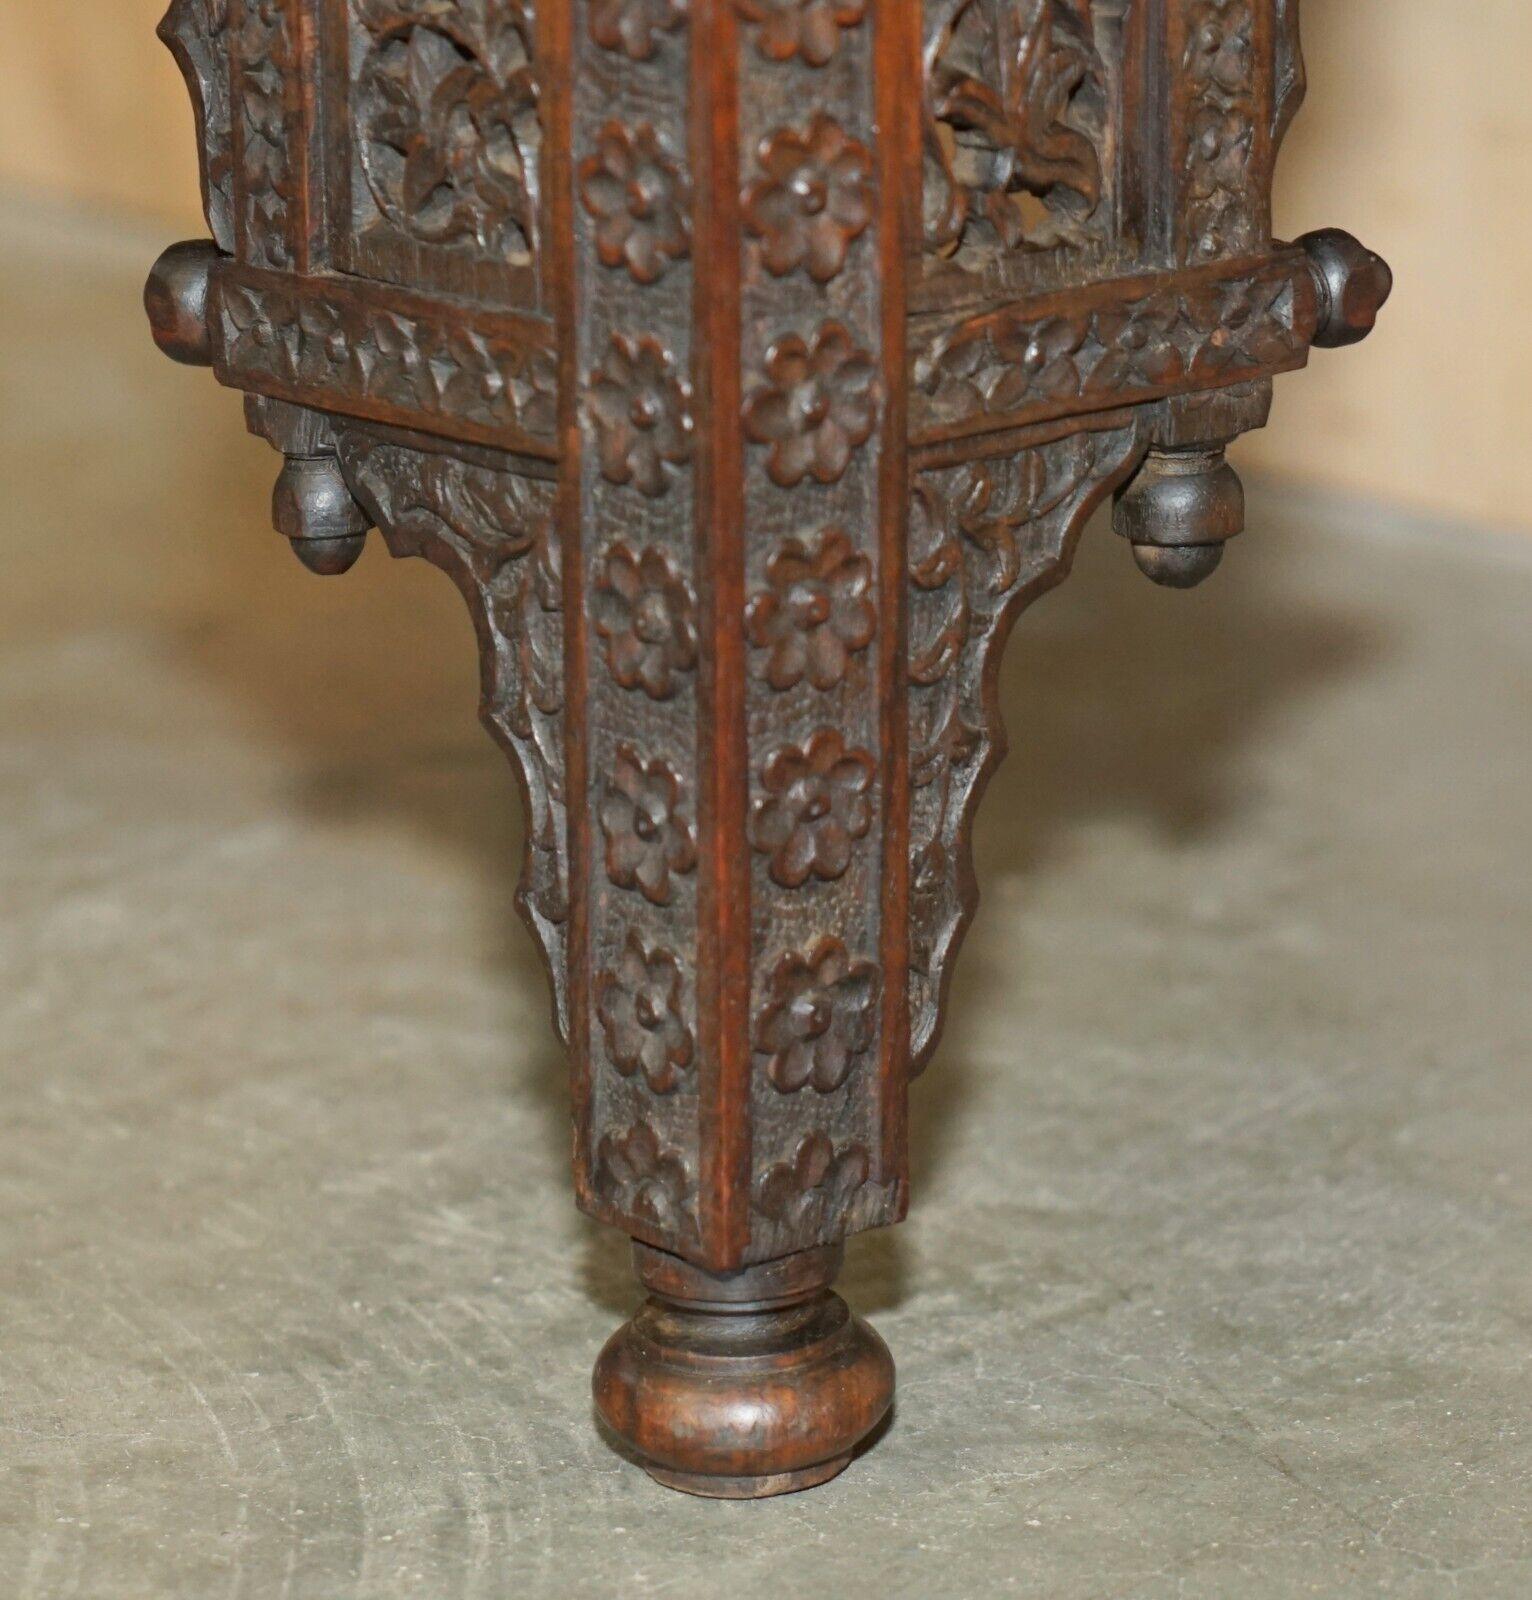 FINE LARGE ANTIQUE HAND CARved LiBERTY LONDON MOORISH OCCASIONAL CENTRE TABLE im Angebot 9